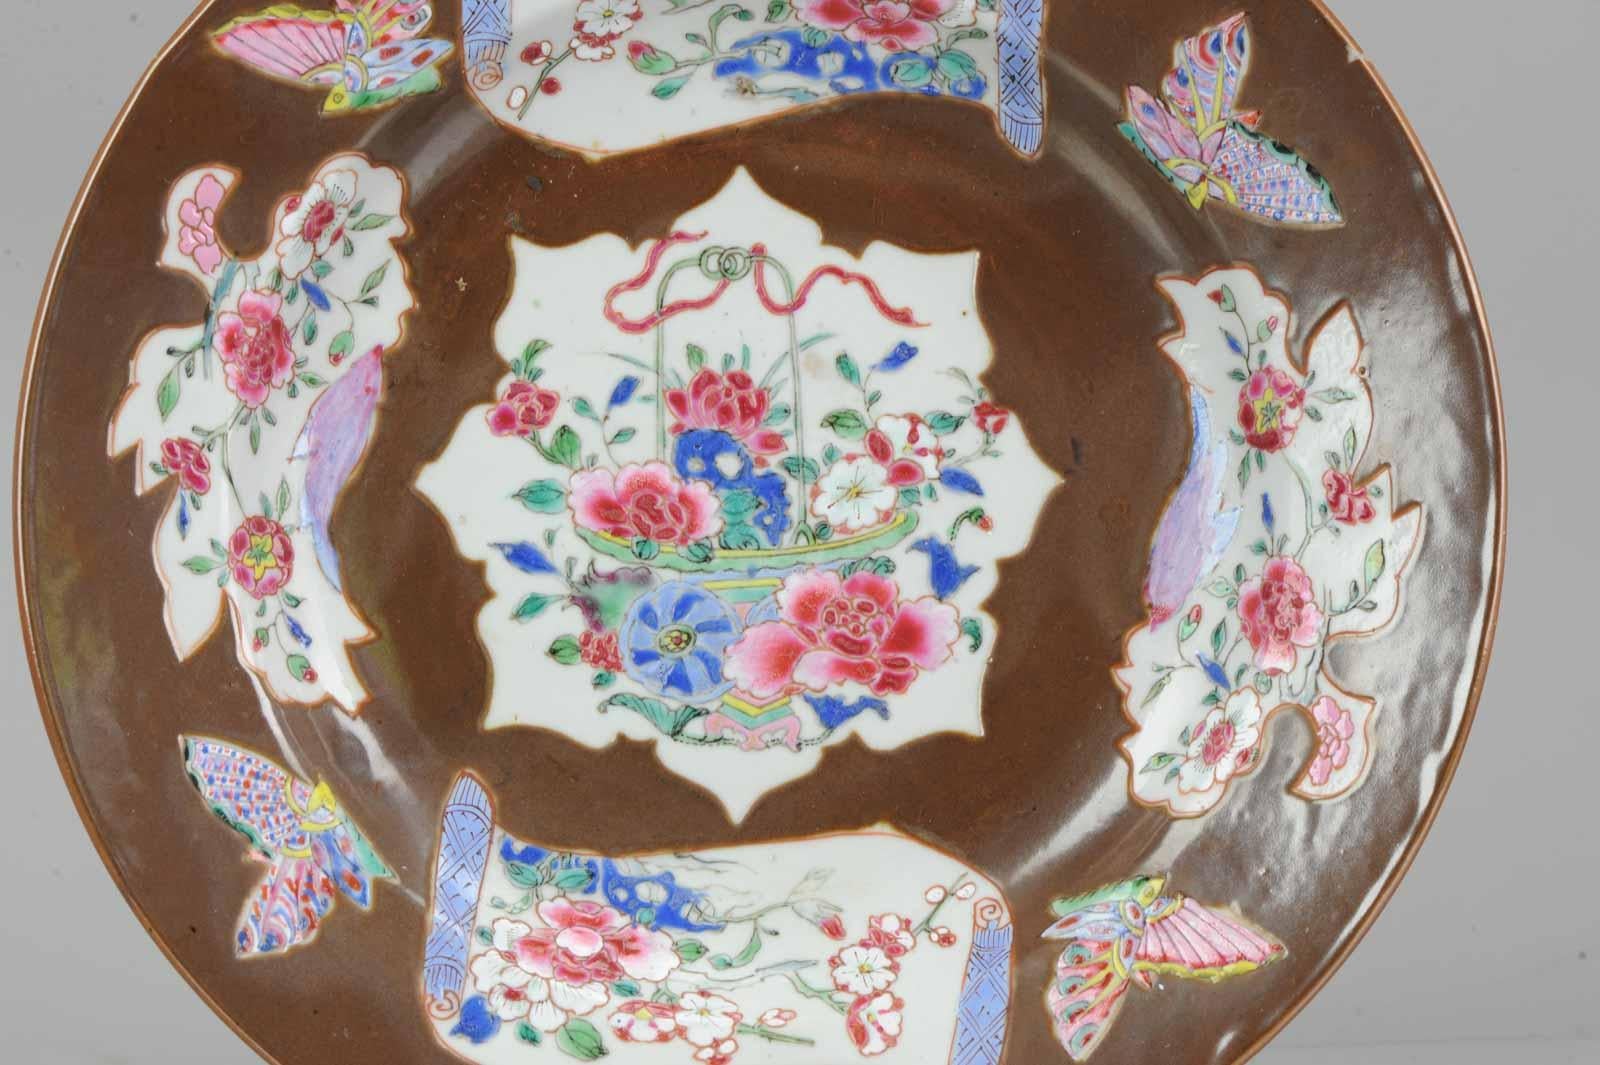 A very nicely made dish with a beautiful decoration.

Batavia brown

A decorative style within Chinese export porcelain using a surface covering brown glaze with or without panels in conjunction with underglaze blue or enamels. The wares appear